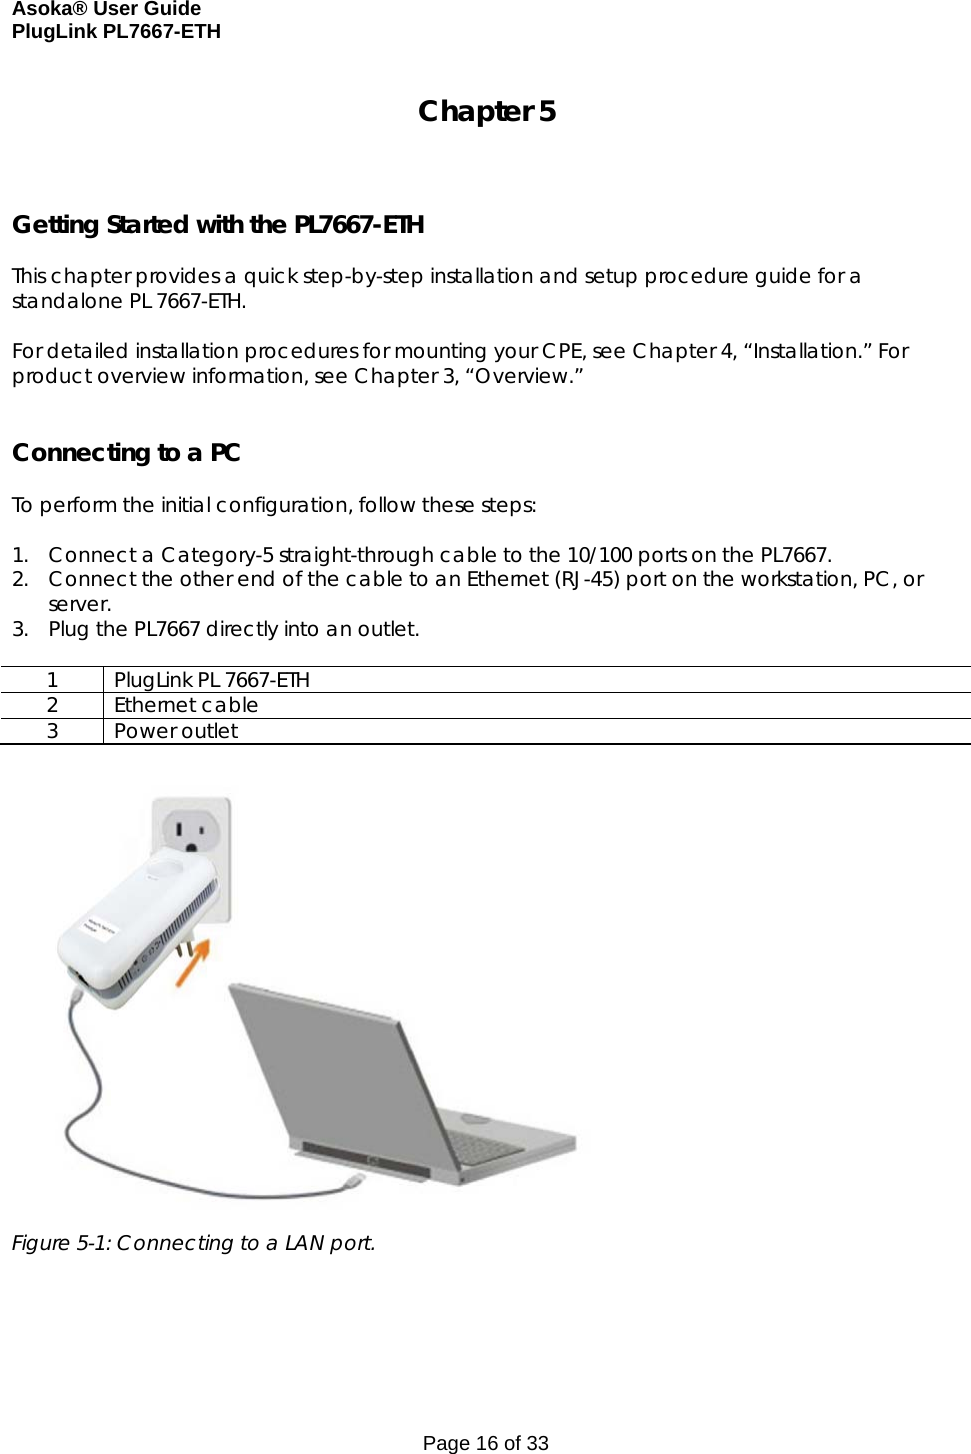 Asoka® User Guide  PlugLink PL7667-ETH Page 16 of 33 Chapter 5    Getting Started with the PL7667-ETH  This chapter provides a quick step-by-step installation and setup procedure guide for a standalone PL 7667-ETH.   For detailed installation procedures for mounting your CPE, see Chapter 4, “Installation.” For product overview information, see Chapter 3, “Overview.”   Connecting to a PC  To perform the initial configuration, follow these steps:  1. Connect a Category-5 straight-through cable to the 10/100 ports on the PL7667.  2. Connect the other end of the cable to an Ethernet (RJ-45) port on the workstation, PC, or server. 3. Plug the PL7667 directly into an outlet.  1  PlugLink PL 7667-ETH 2 Ethernet cable 3 Power outlet   Figure 5-1: Connecting to a LAN port.      